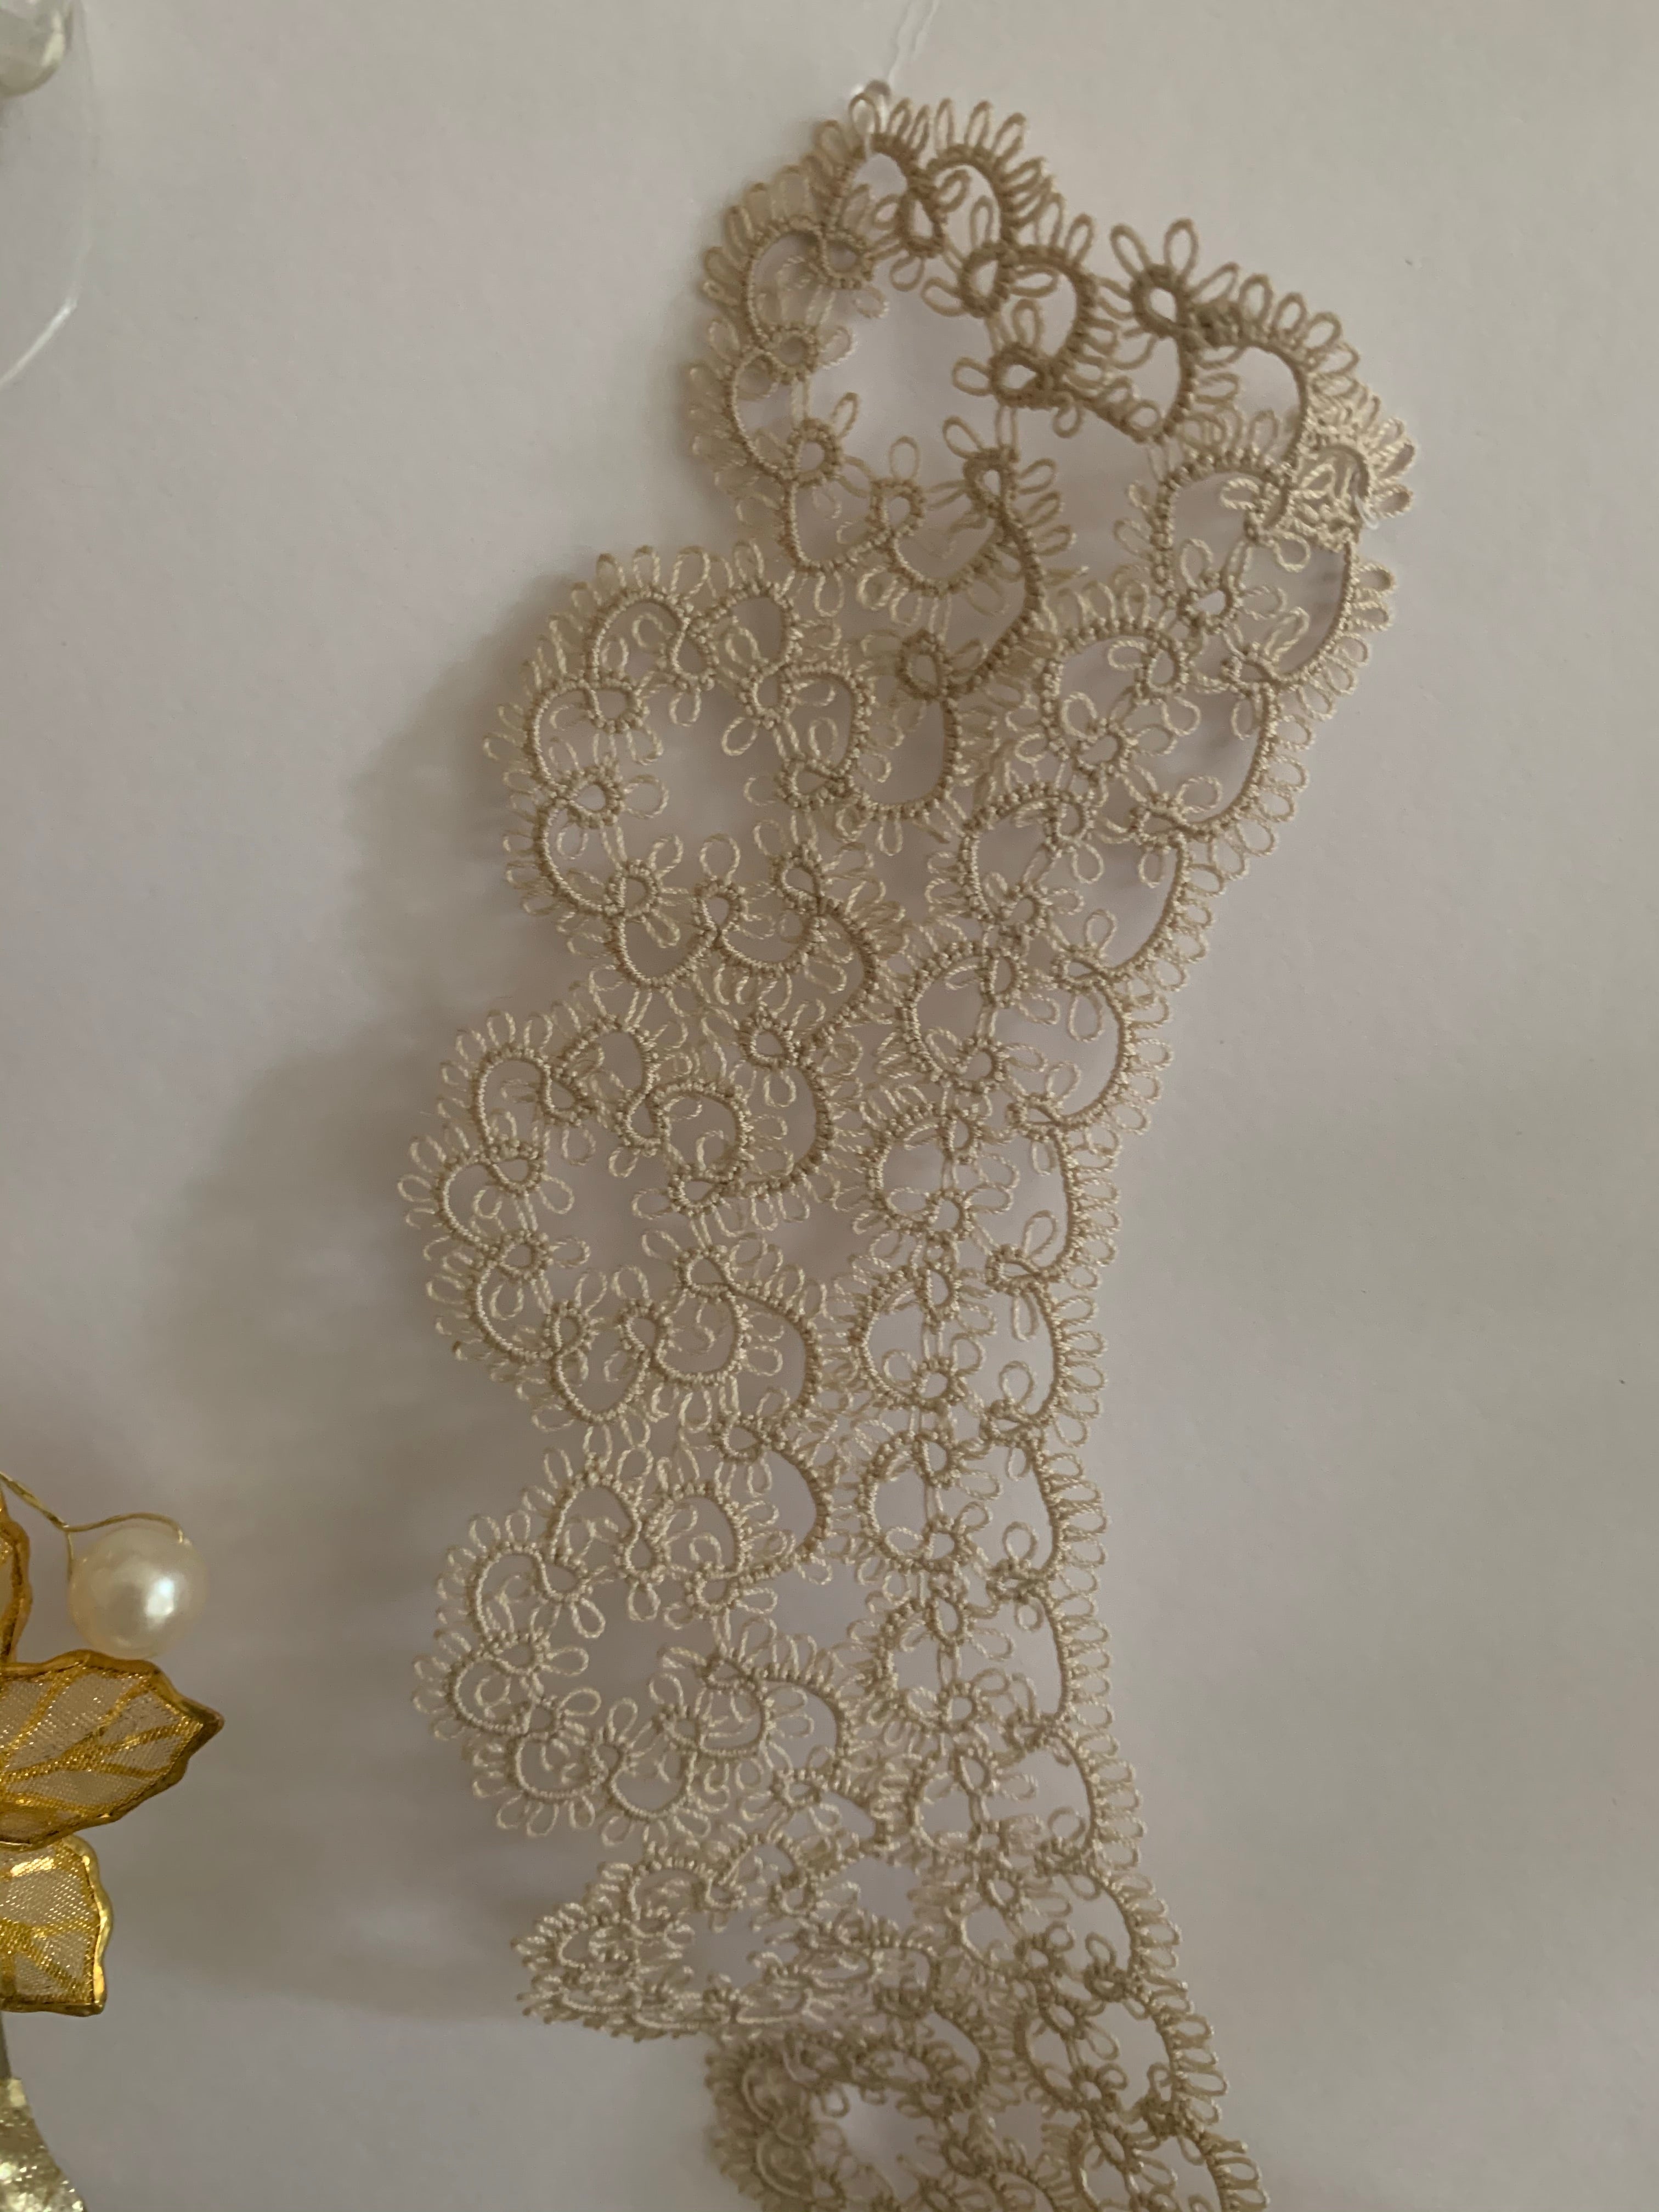 Mounted Antique Crocheted Collar